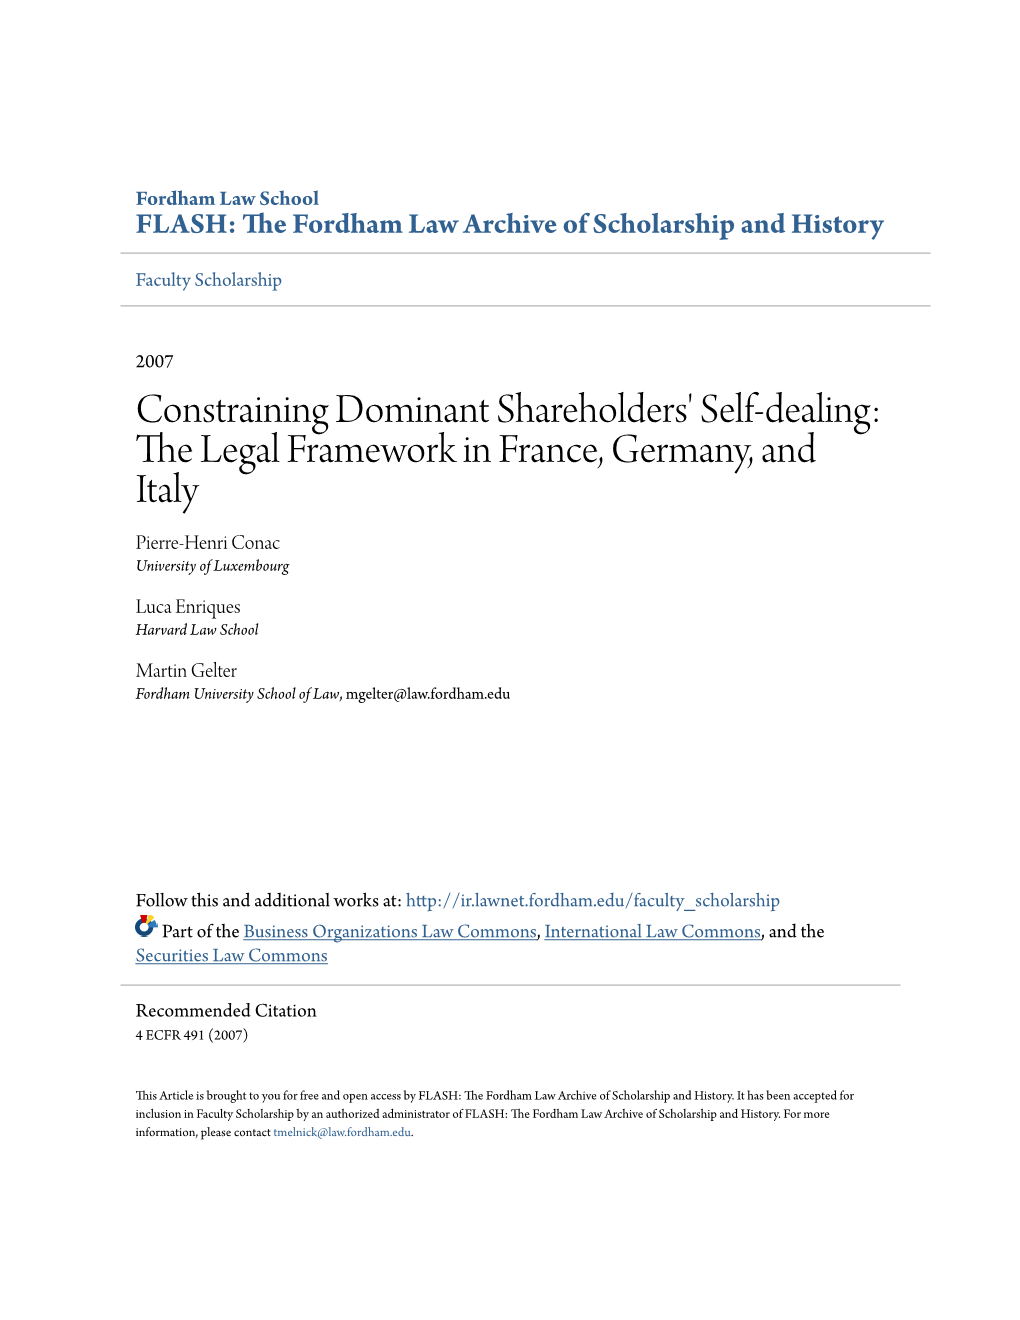 Constraining Dominant Shareholders' Self-Dealing: the Legal Framework in France, Germany, and Italy Pierre-Henri Conac University of Luxembourg